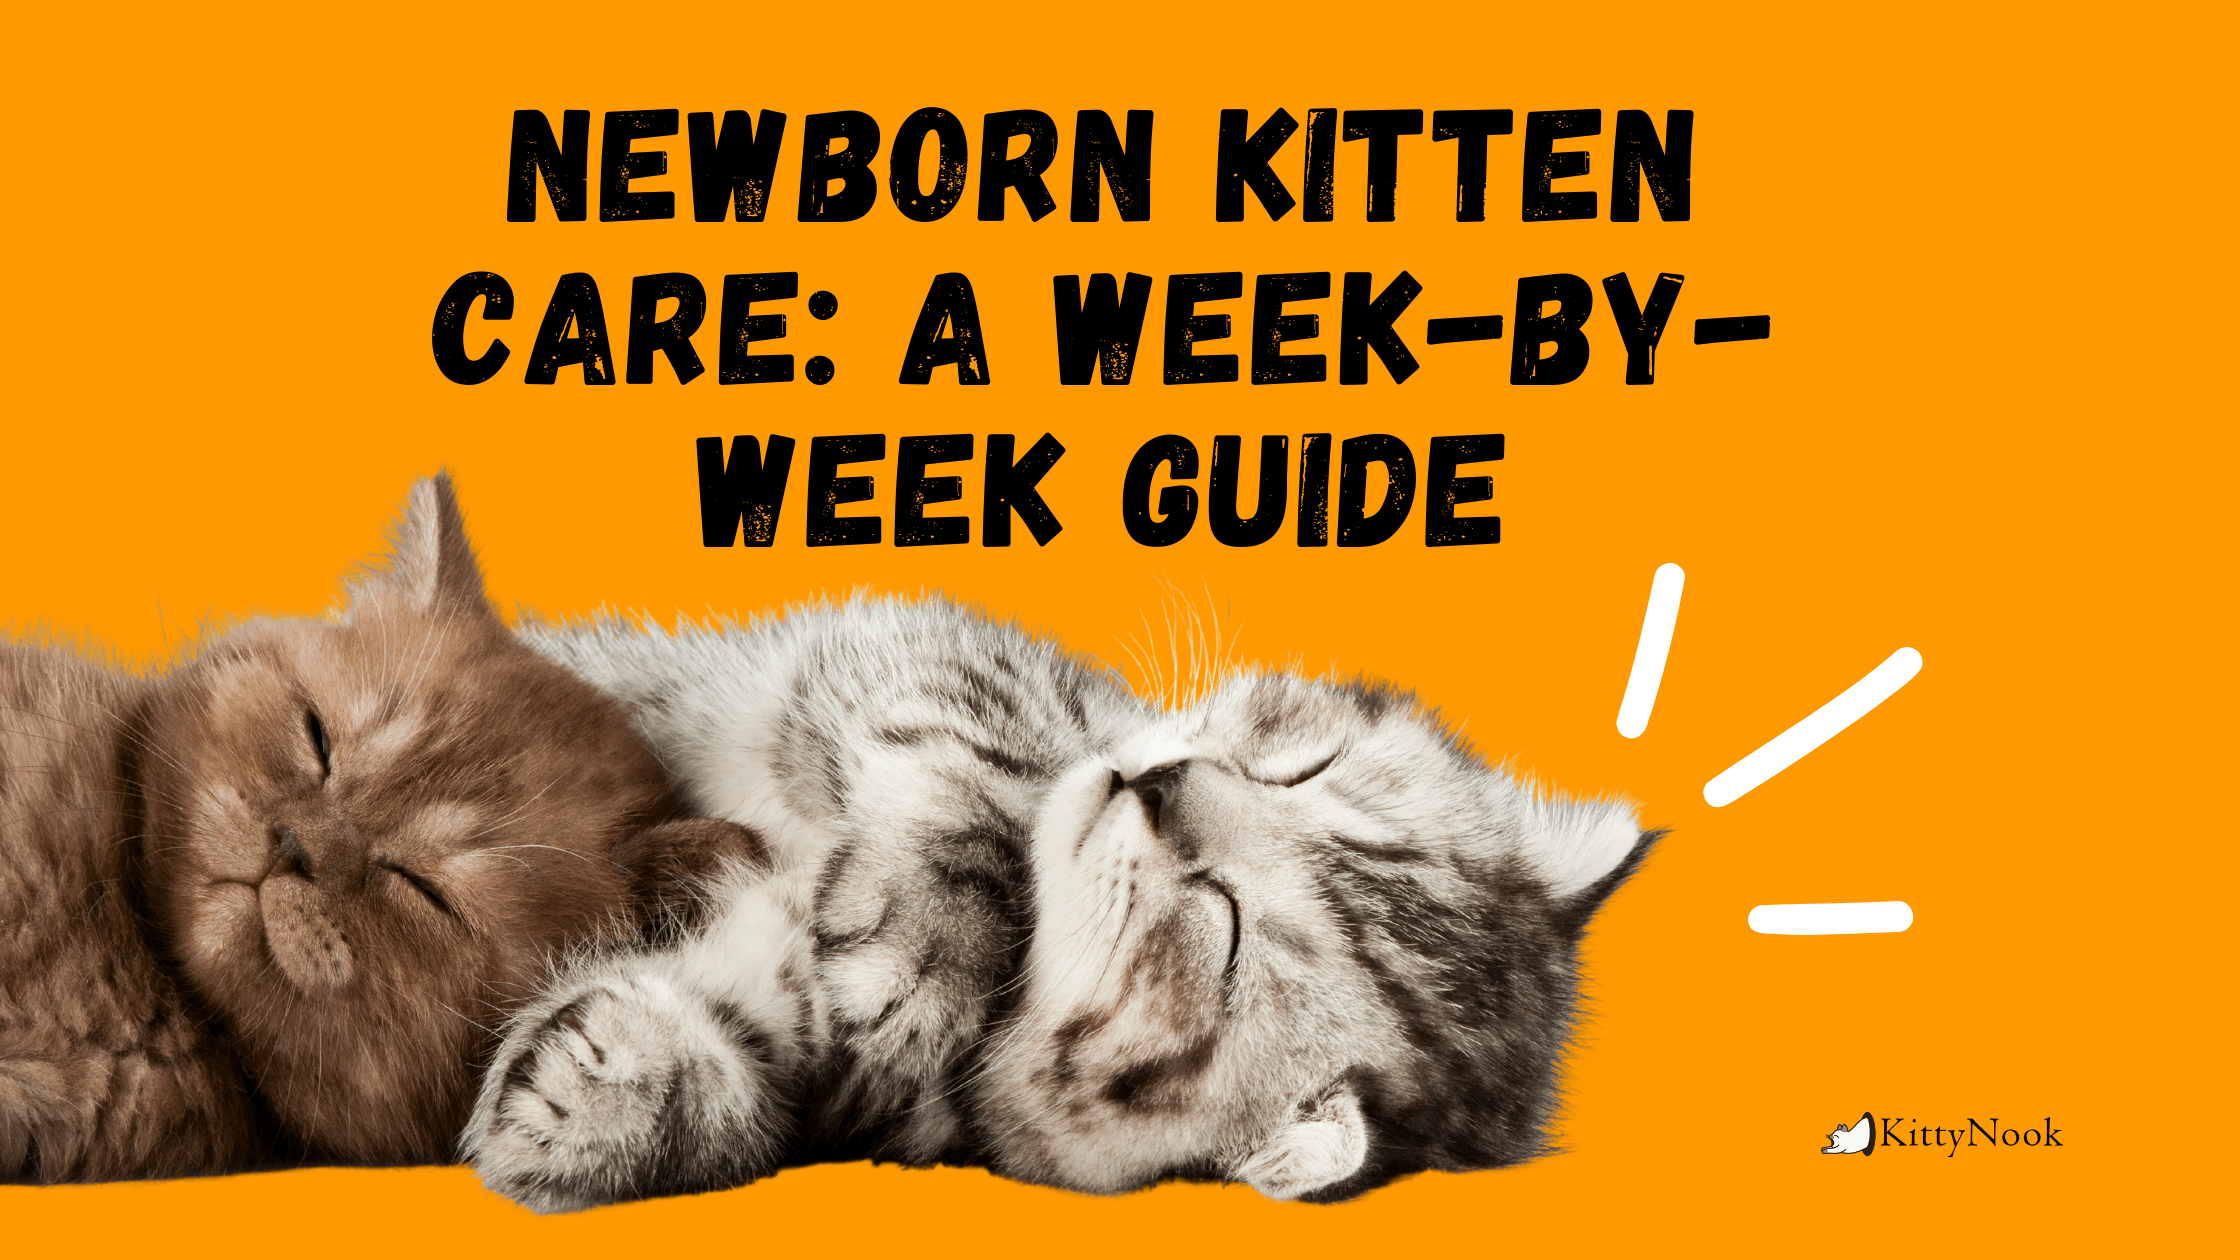 two kittens lying on the ground with text newborn kitten care on yellow background